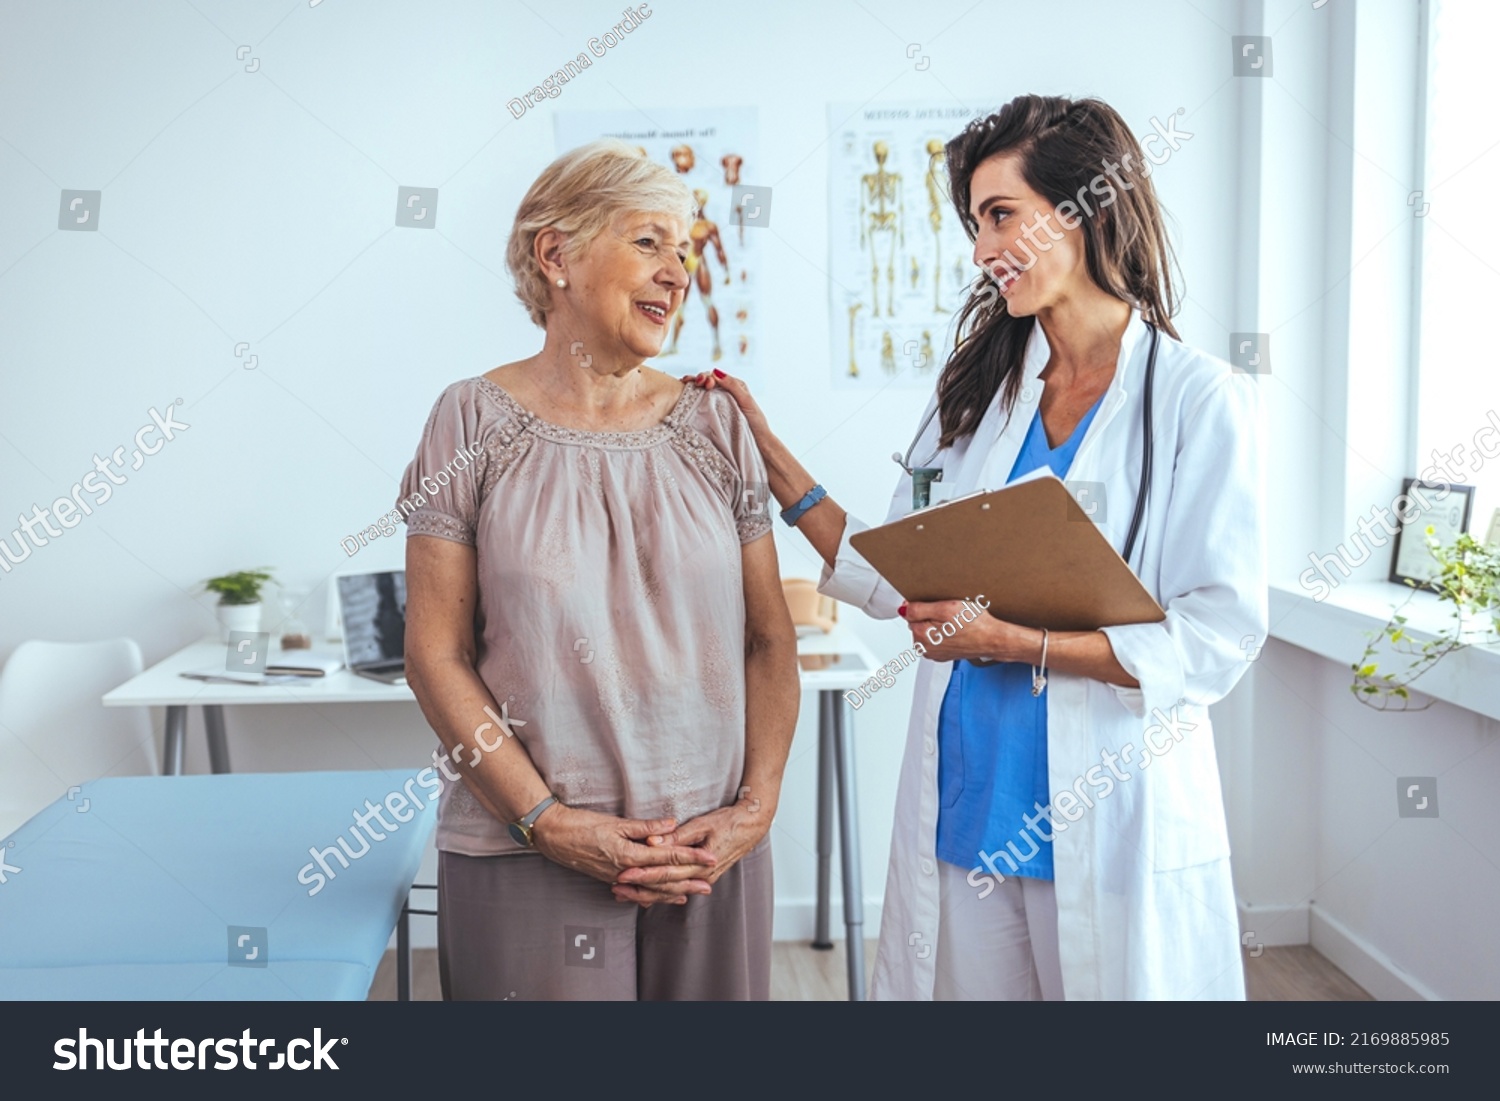 Portrait of female doctor explaining diagnosis to her patient. Female Doctor Meeting With Patient In Exam Room. Cropped shot of a medical practitioner reassuring a patient #2169885985